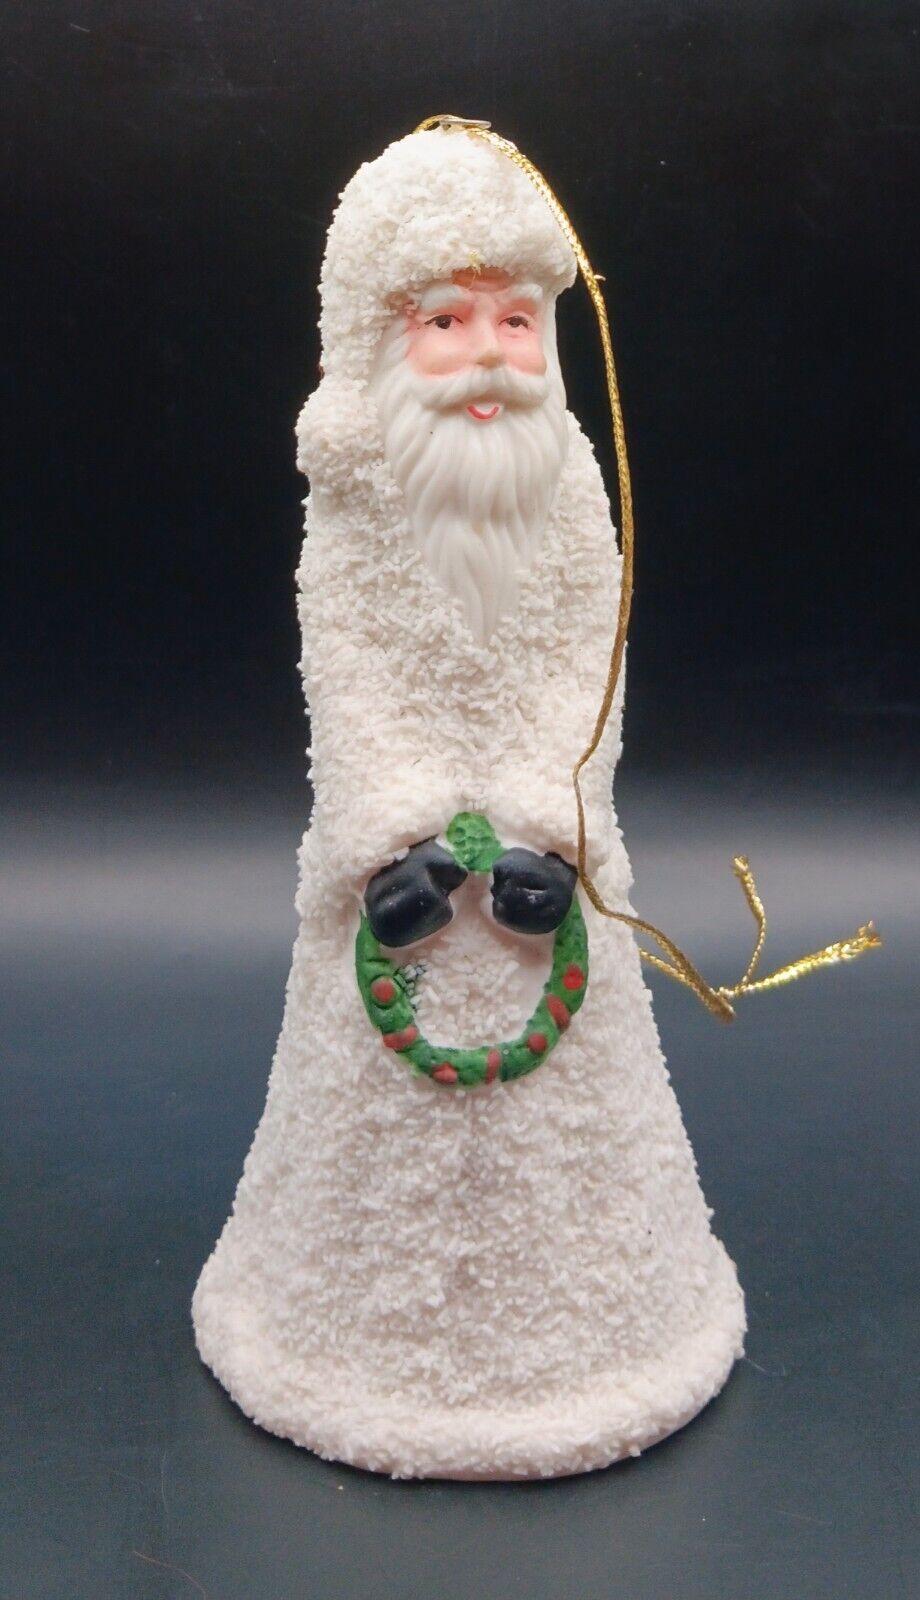 Antique Vintage Santa Claus Bell - Hanging Christmas Ornament - Extremely Rare